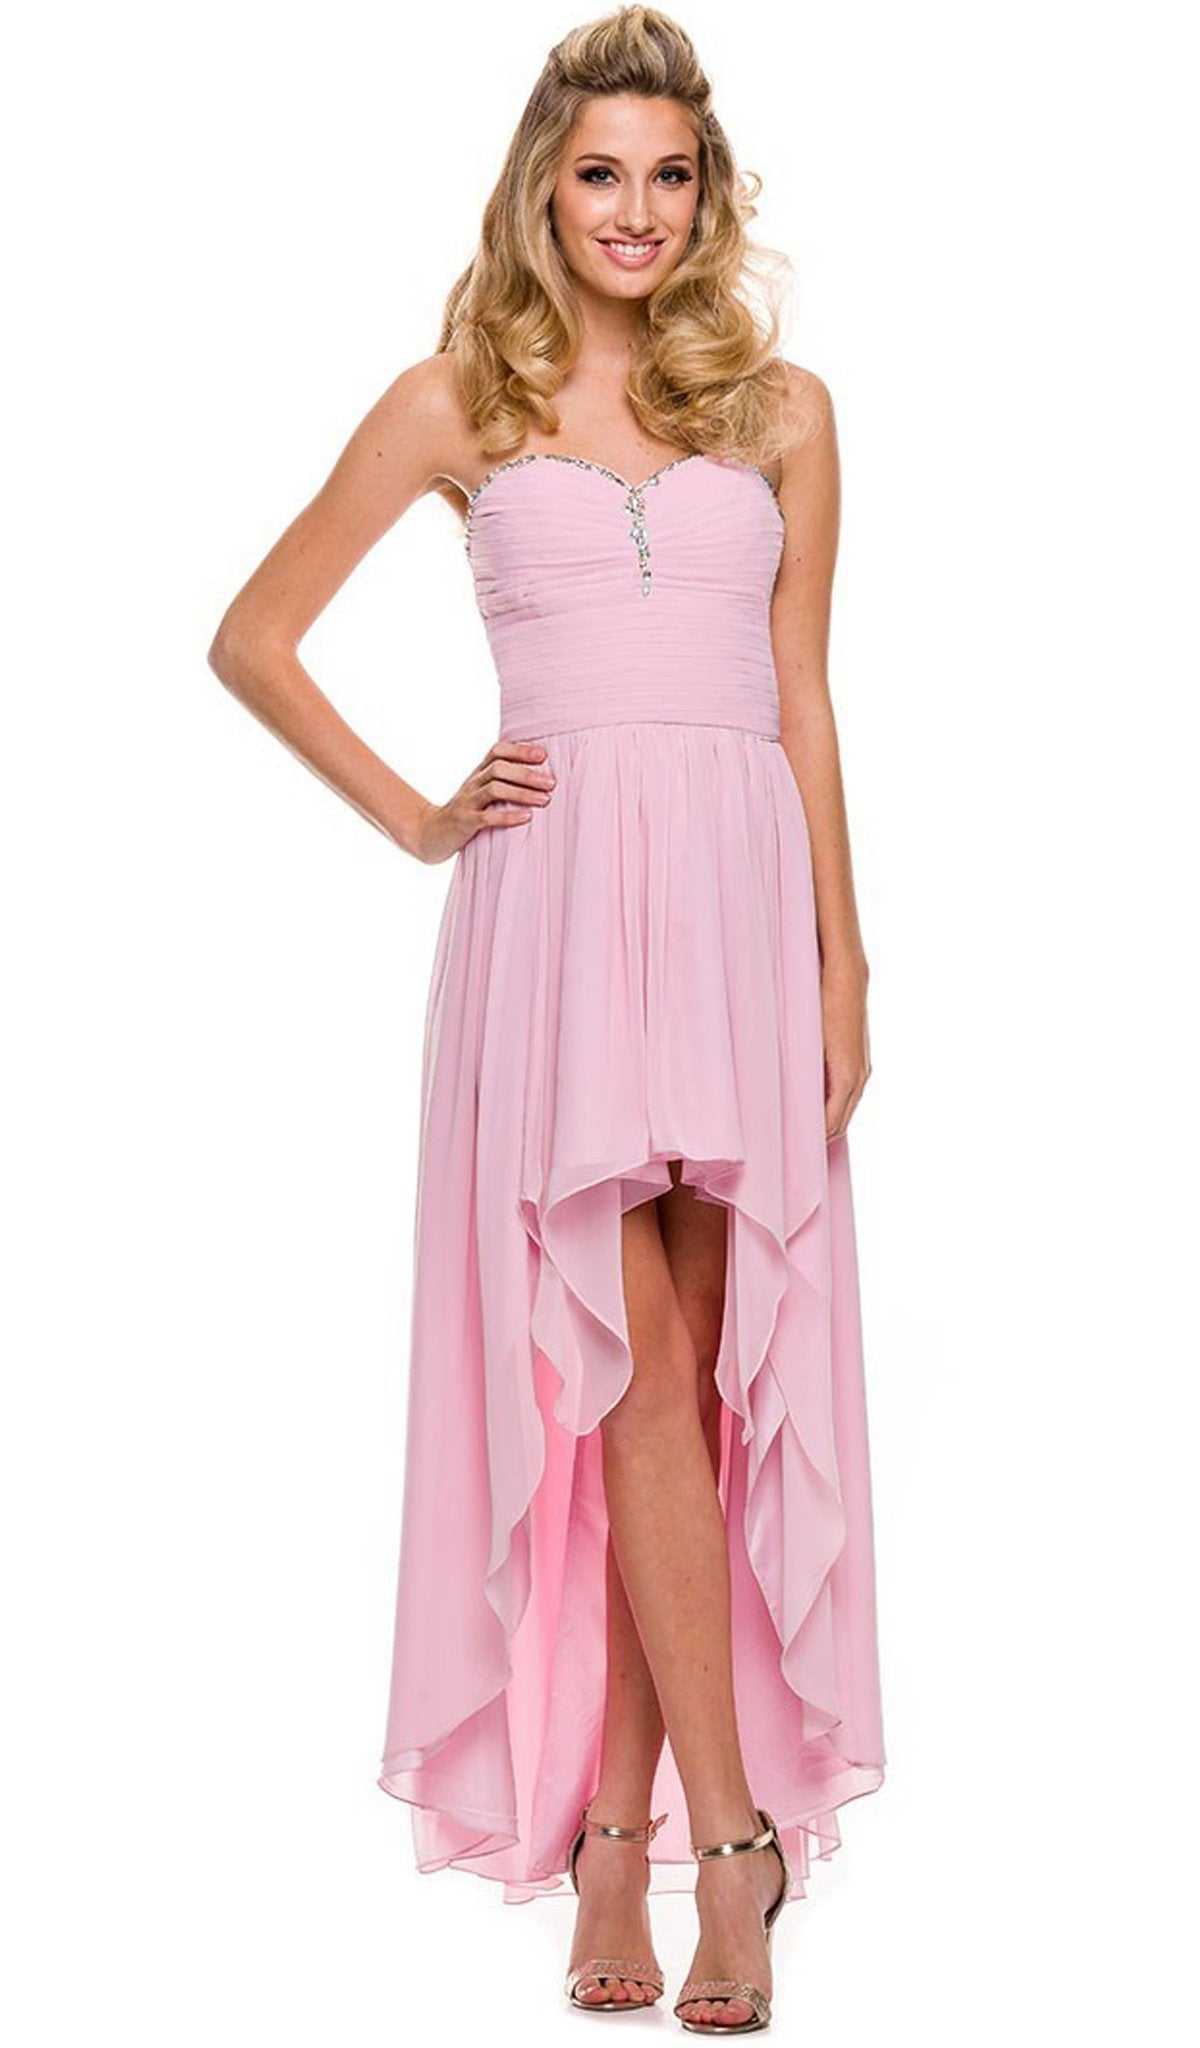 Nox Anabel, Nox Anabel - 2699 Strapless Ruched High Low Dress